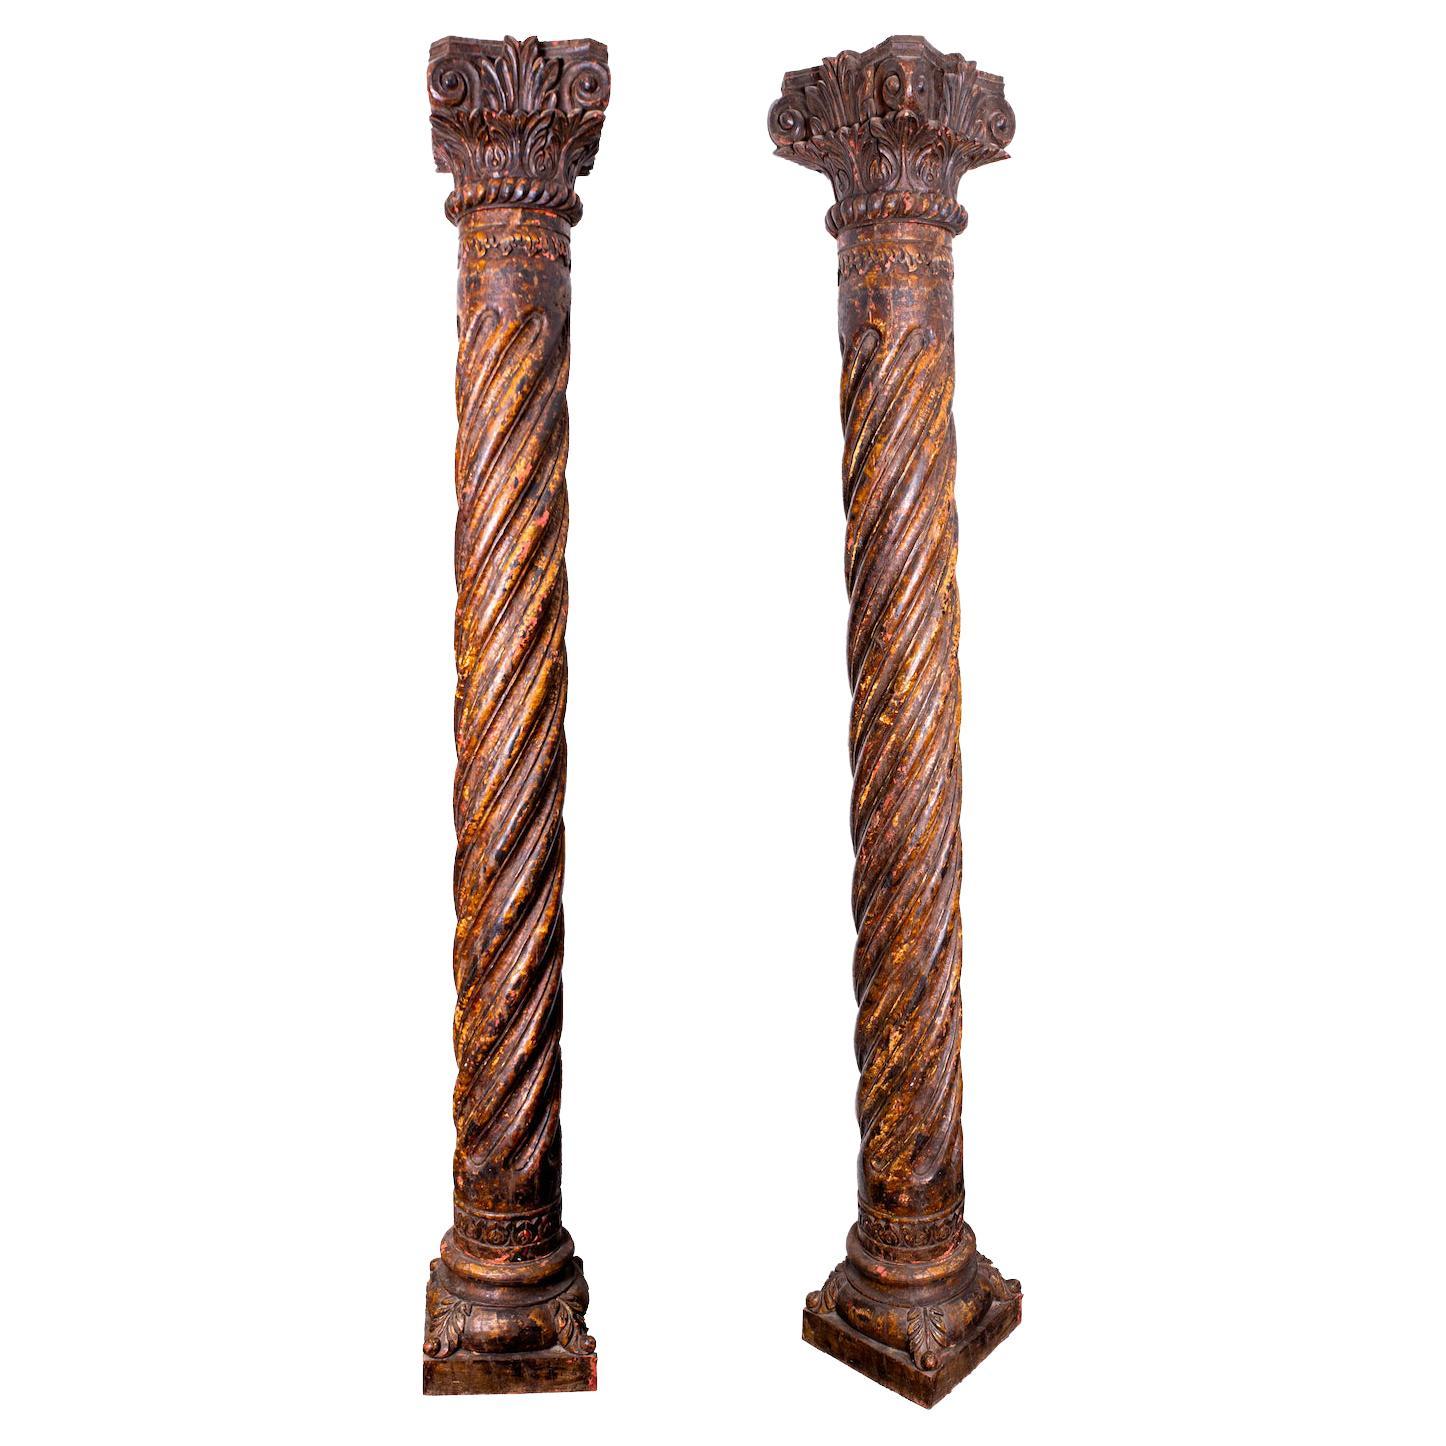 Pair of Mughal Wooden Columns, India, 19th Century